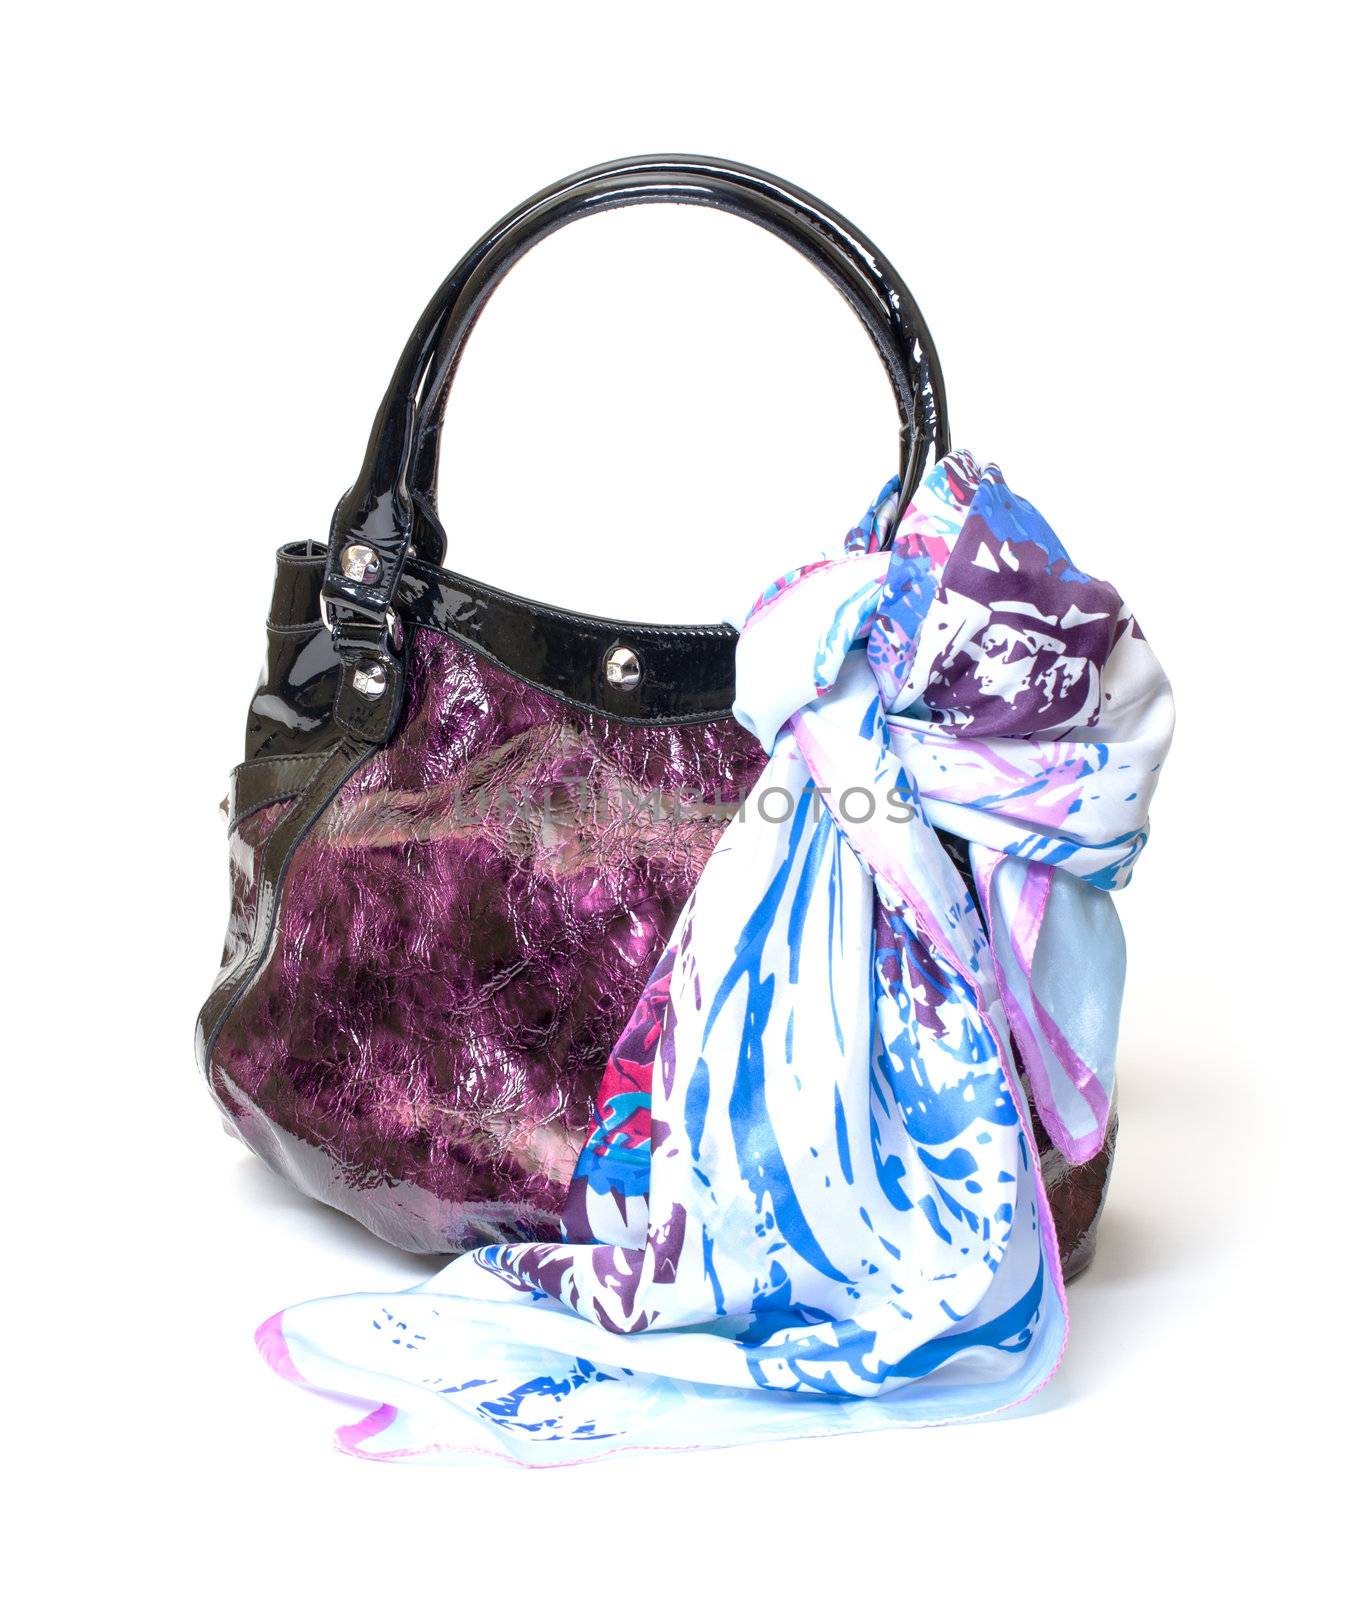 Vibrant Leather Ladies Handbag with Handkerchief by Discovod